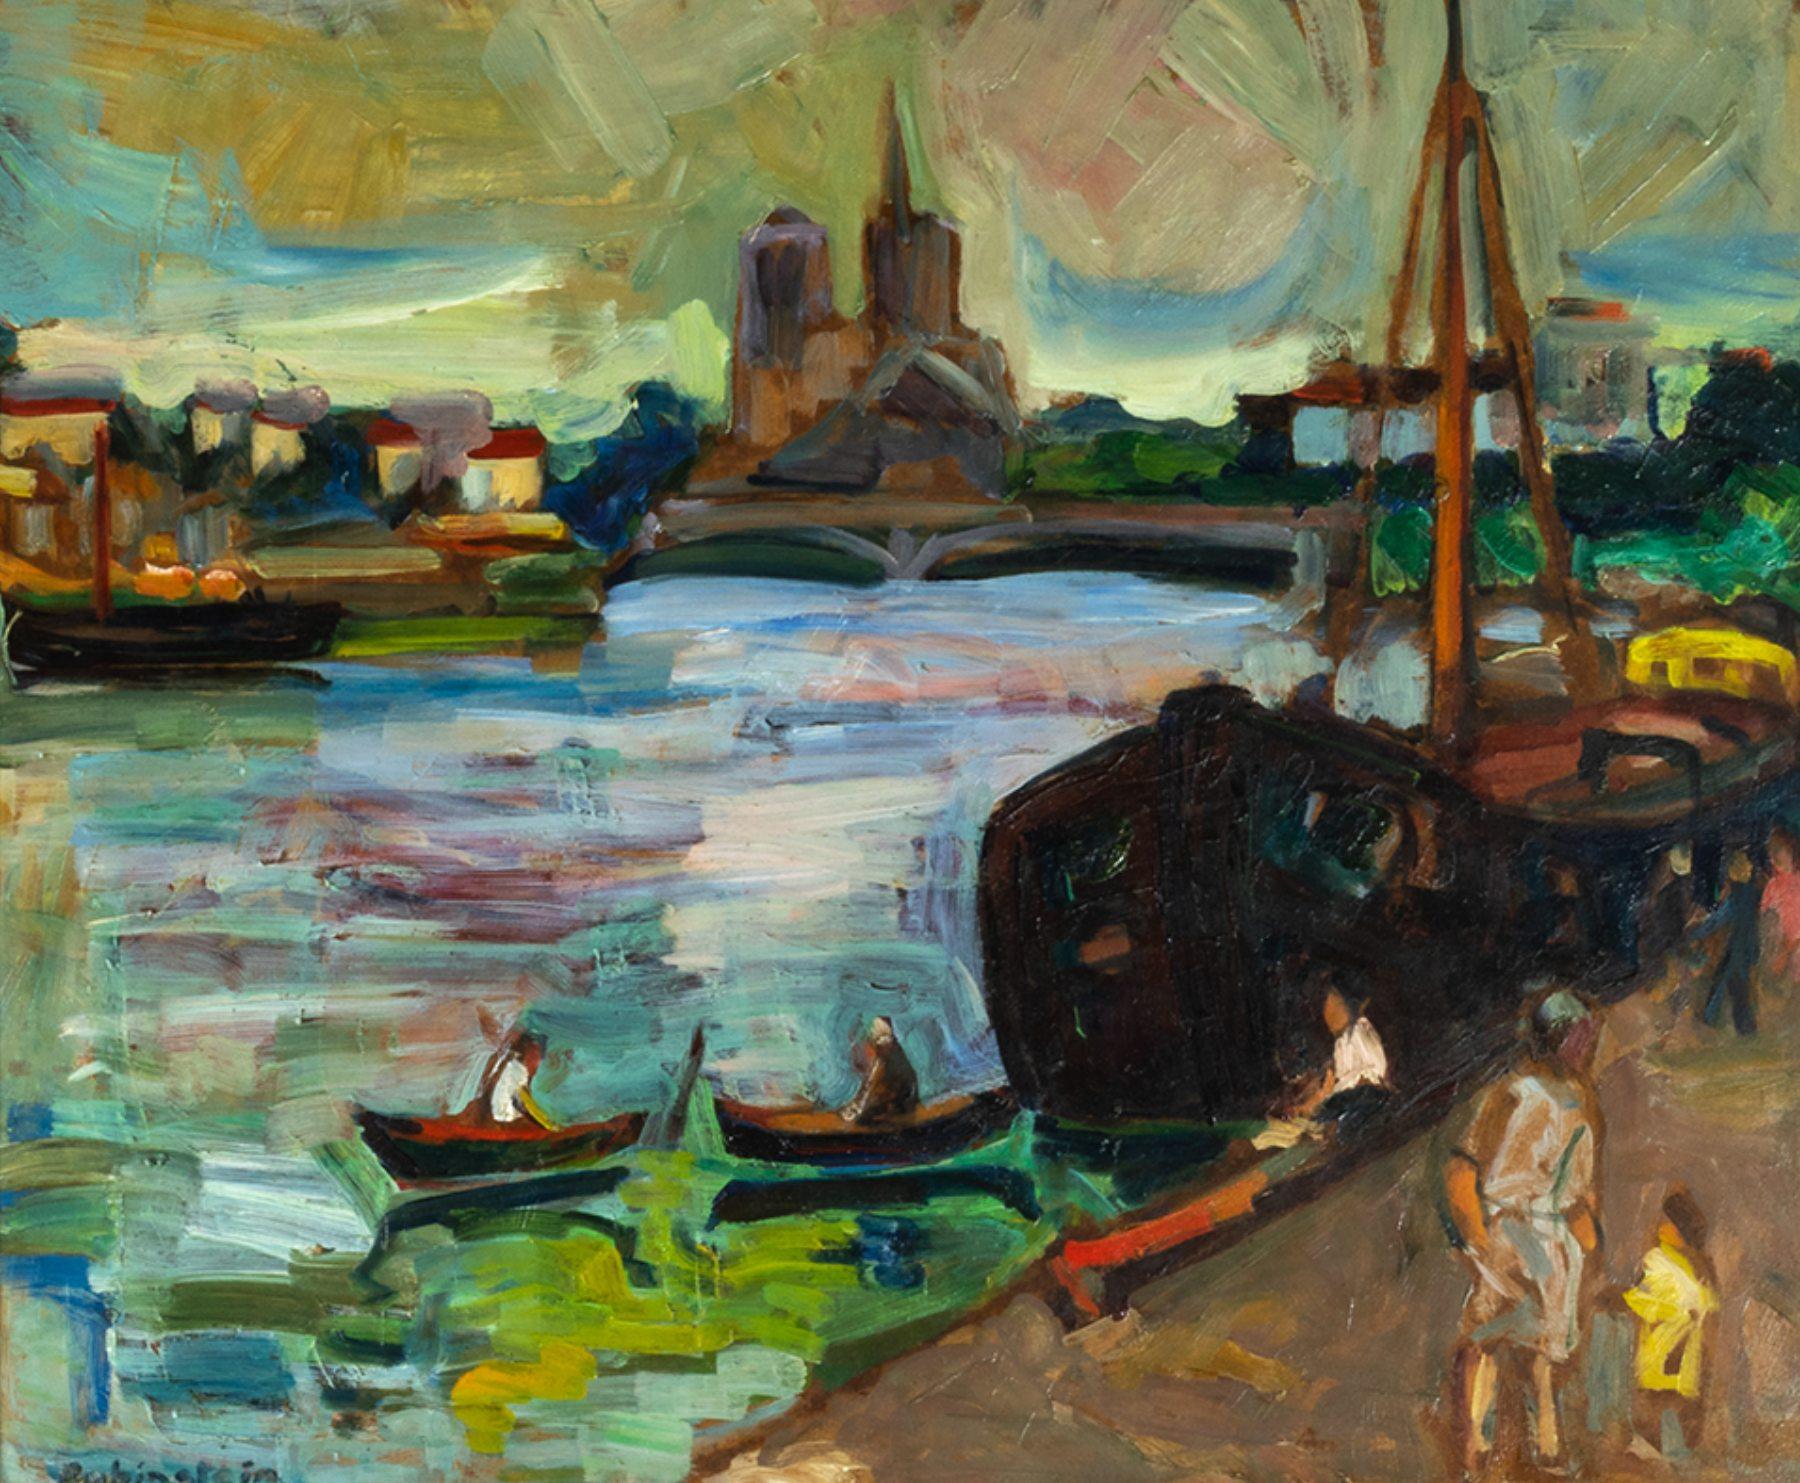 A french background of Paris river channels, Les Barges titled.
A colorful 20th Century Post Impressionist oil painting of Yiddish origin.
“Rubinstein” signed on lower left. 
Description on the back of the painting; early 20th century practitioner